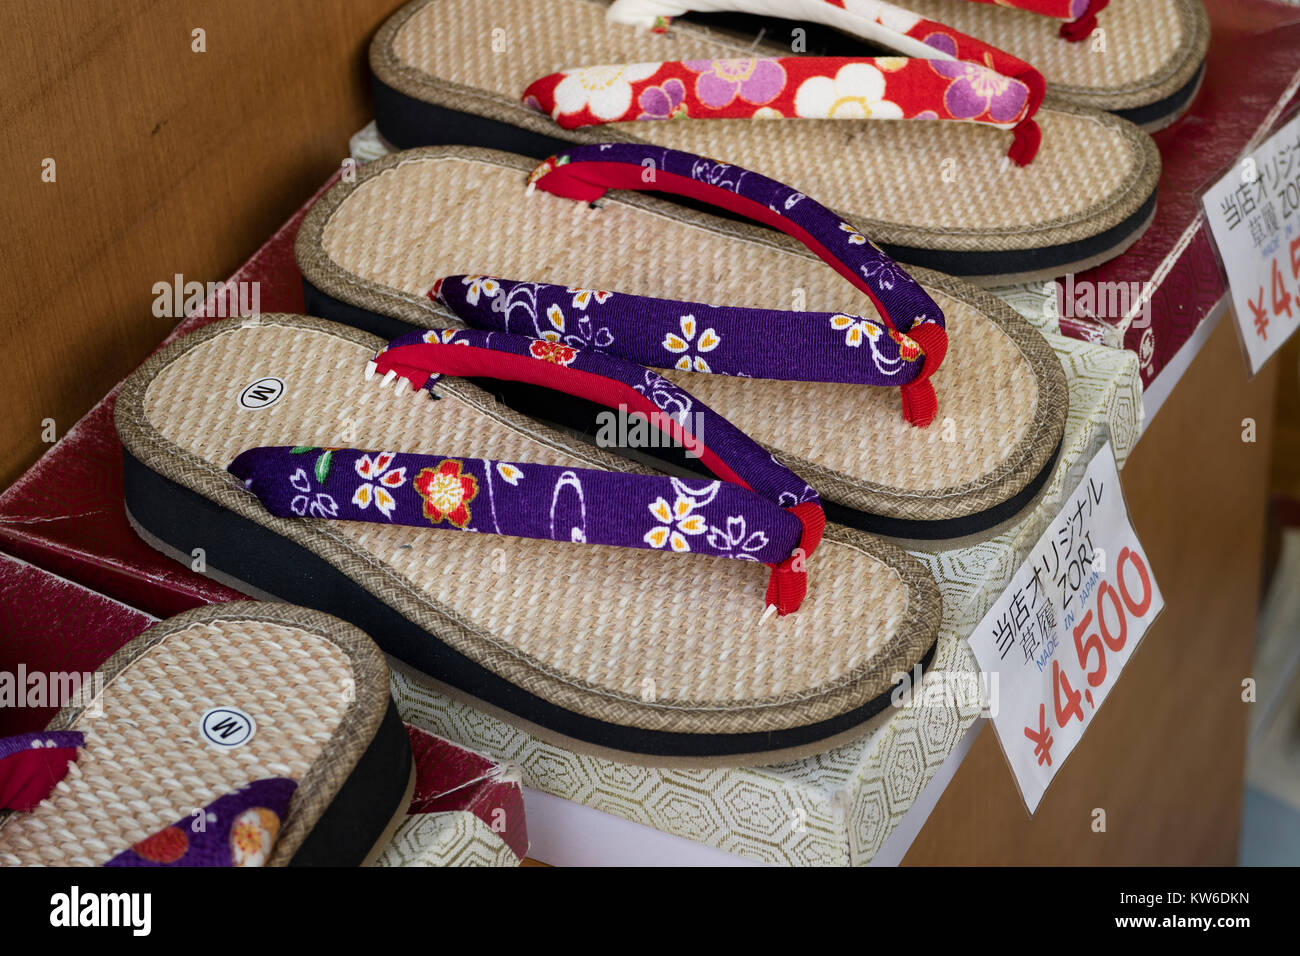 Tokyo - Japan, June 19, 2017:  Shop with traditional Japanese slippers, called zori for sale Stock Photo